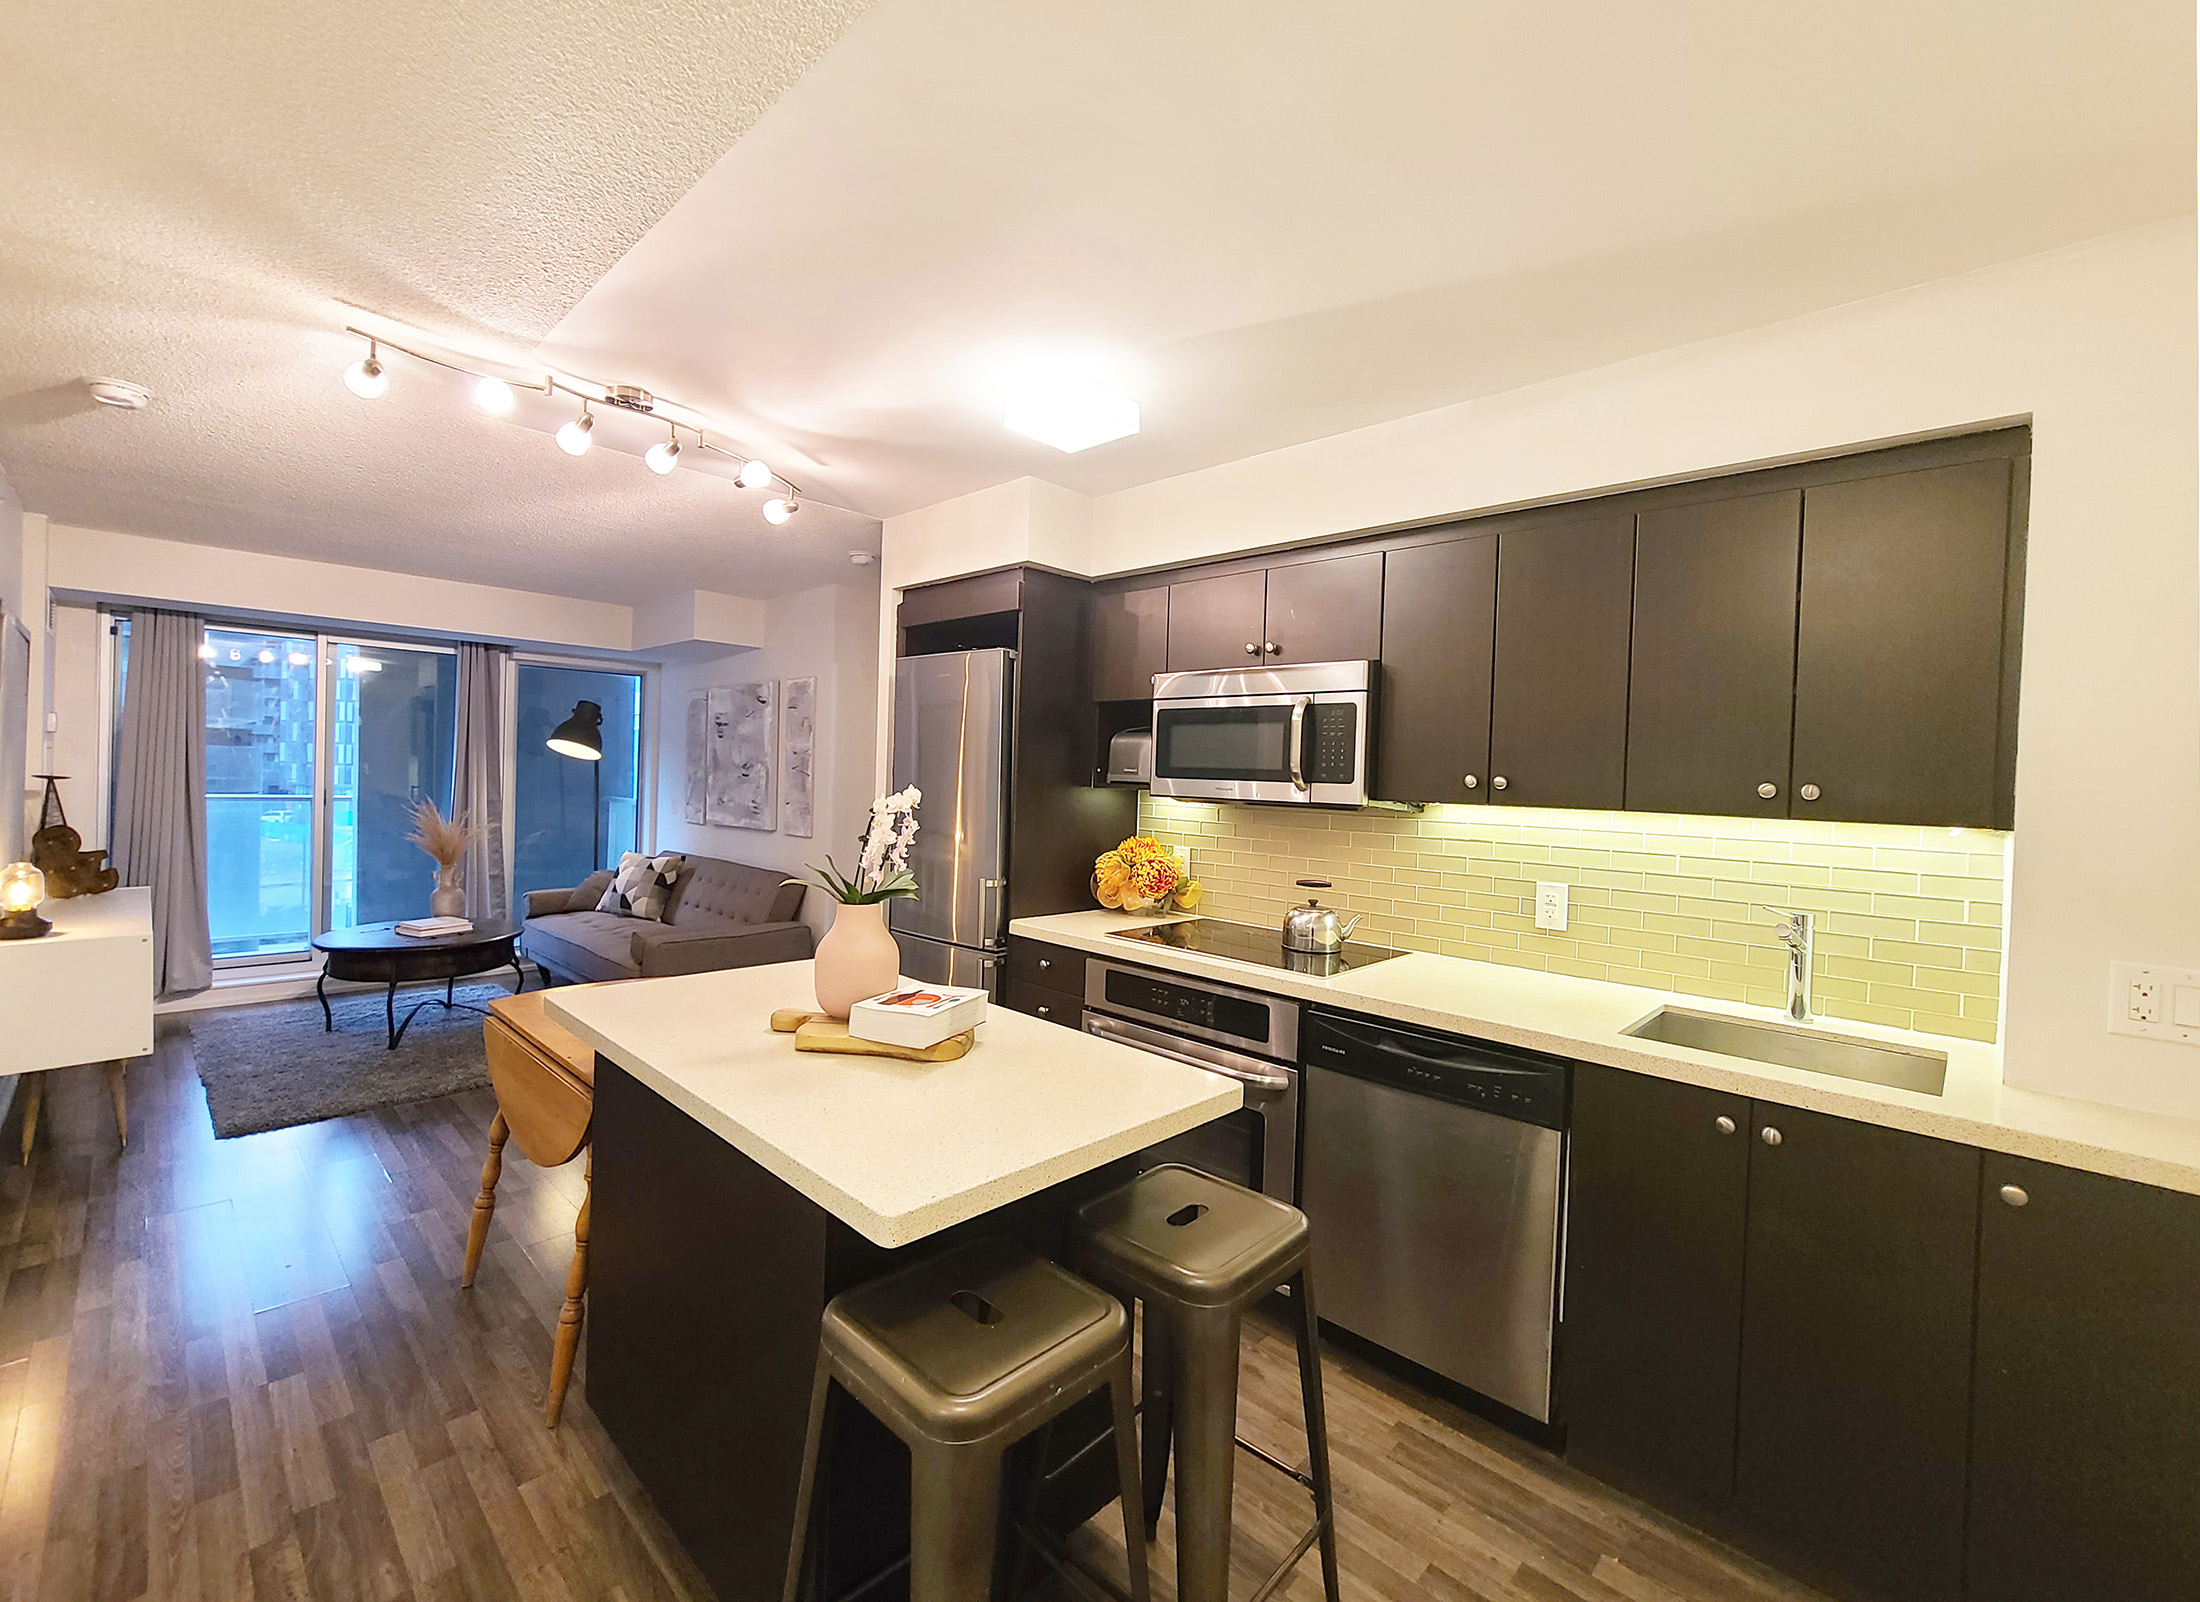 565-wilson-ave-toronto-condos-kitchen-living-space-view